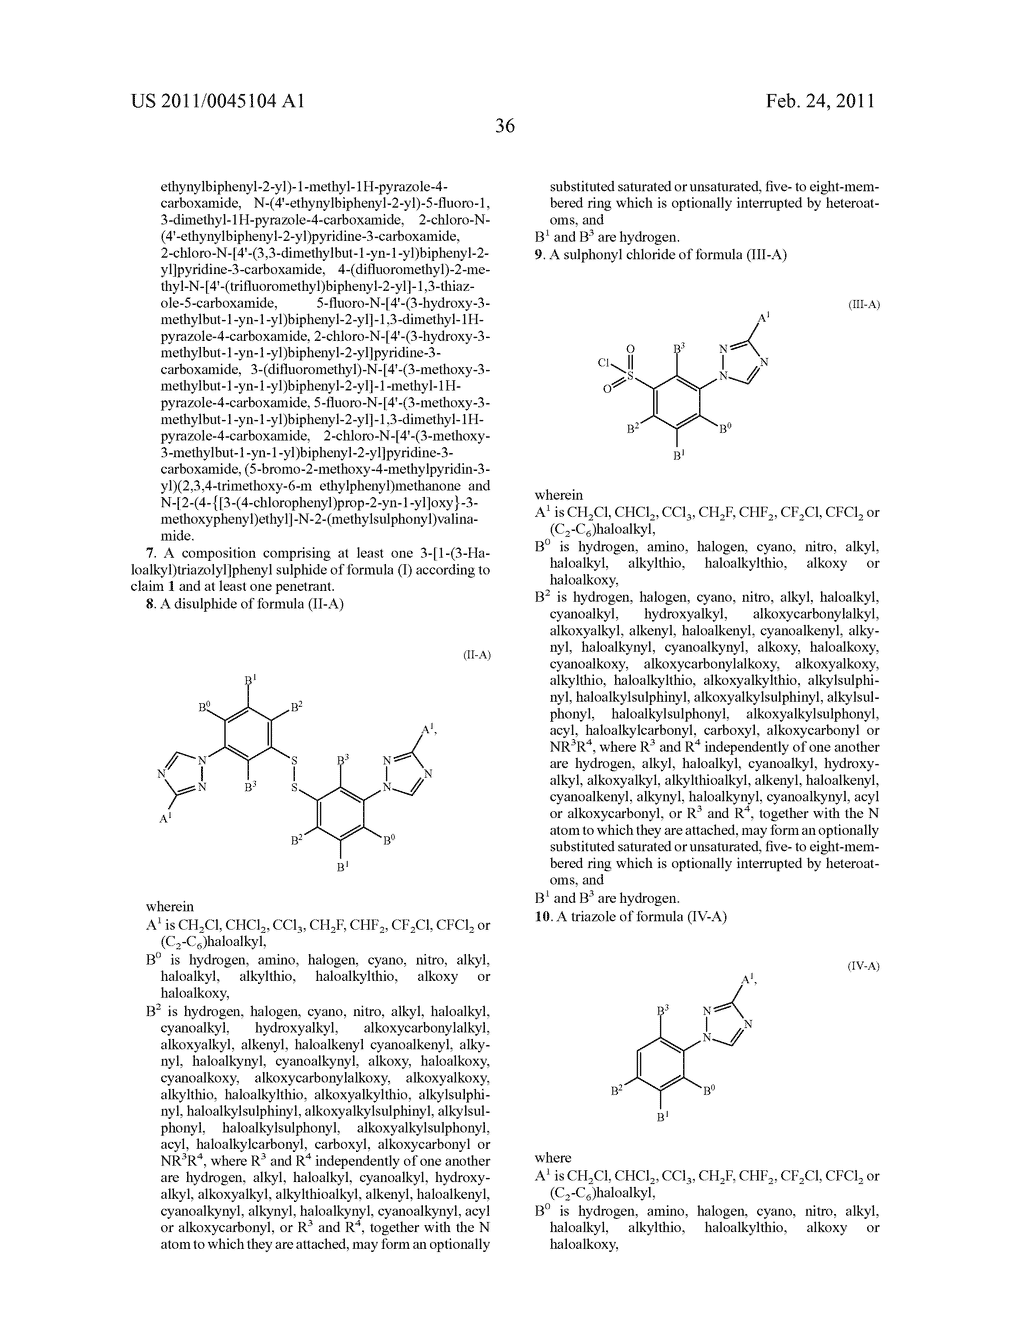 3-[1-(3-Haloalkyl)triazolyl]phenyl sulphide derivatives as acaricides and insecticides - diagram, schematic, and image 37